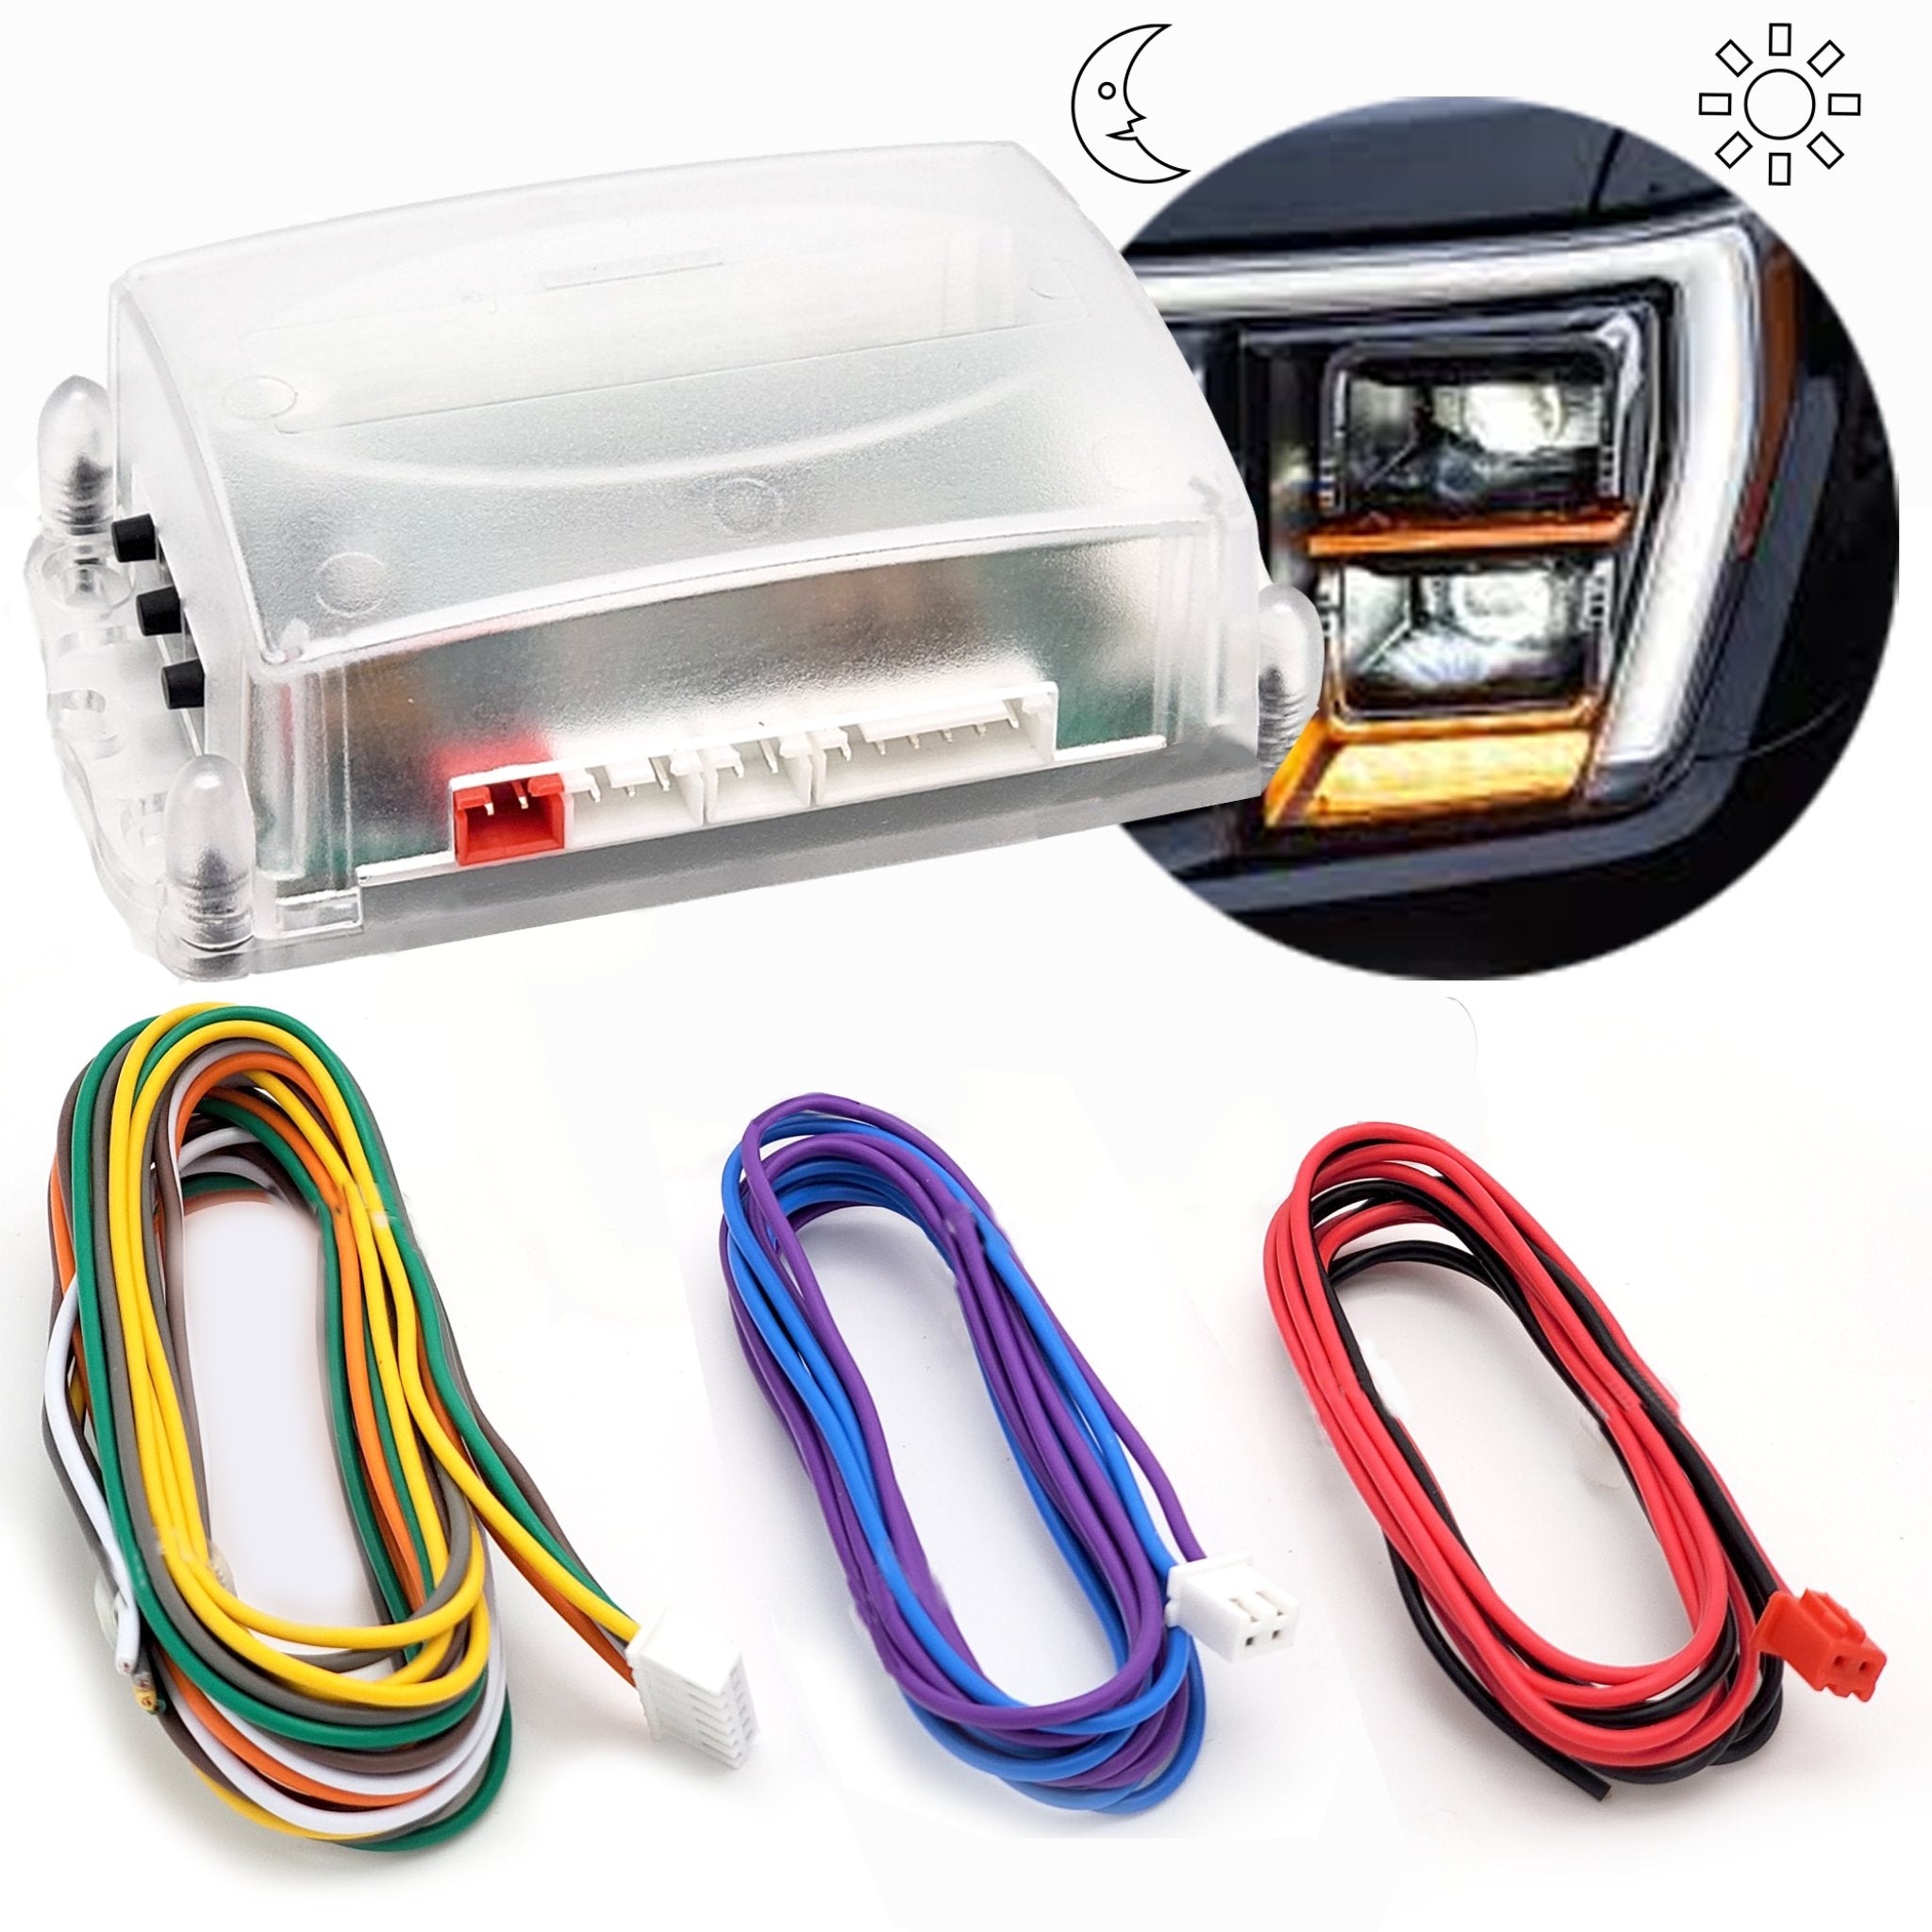 Automatic Car Truck Headlights Light Activated ON/OFF Sensor System Controller